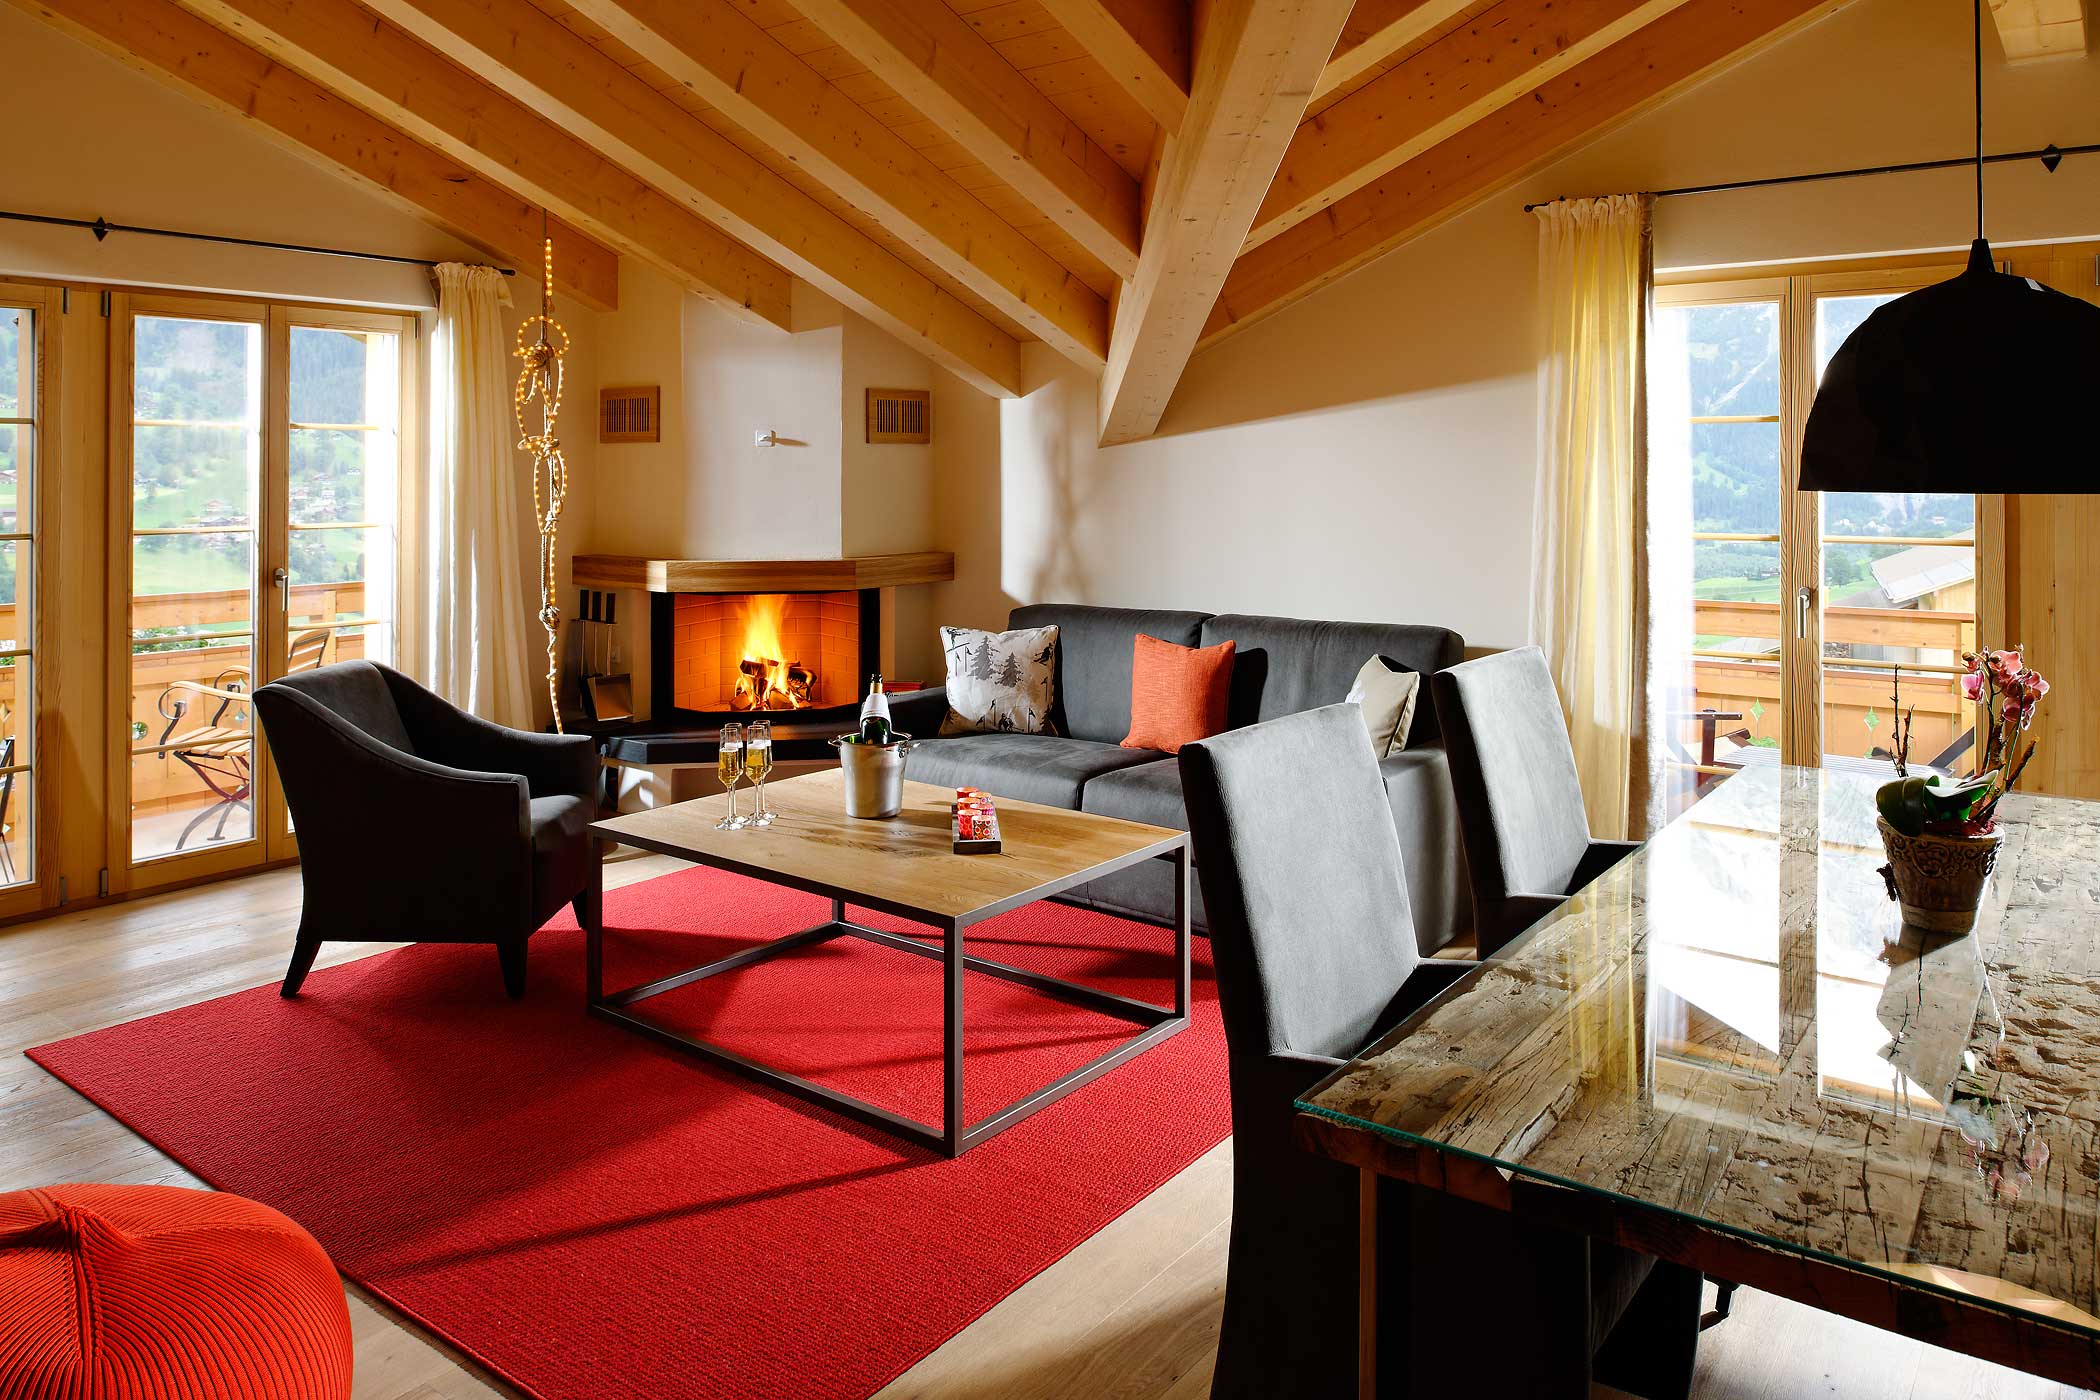 Welcome to Aspen alpin_lifestyle_hotel Grindelwald